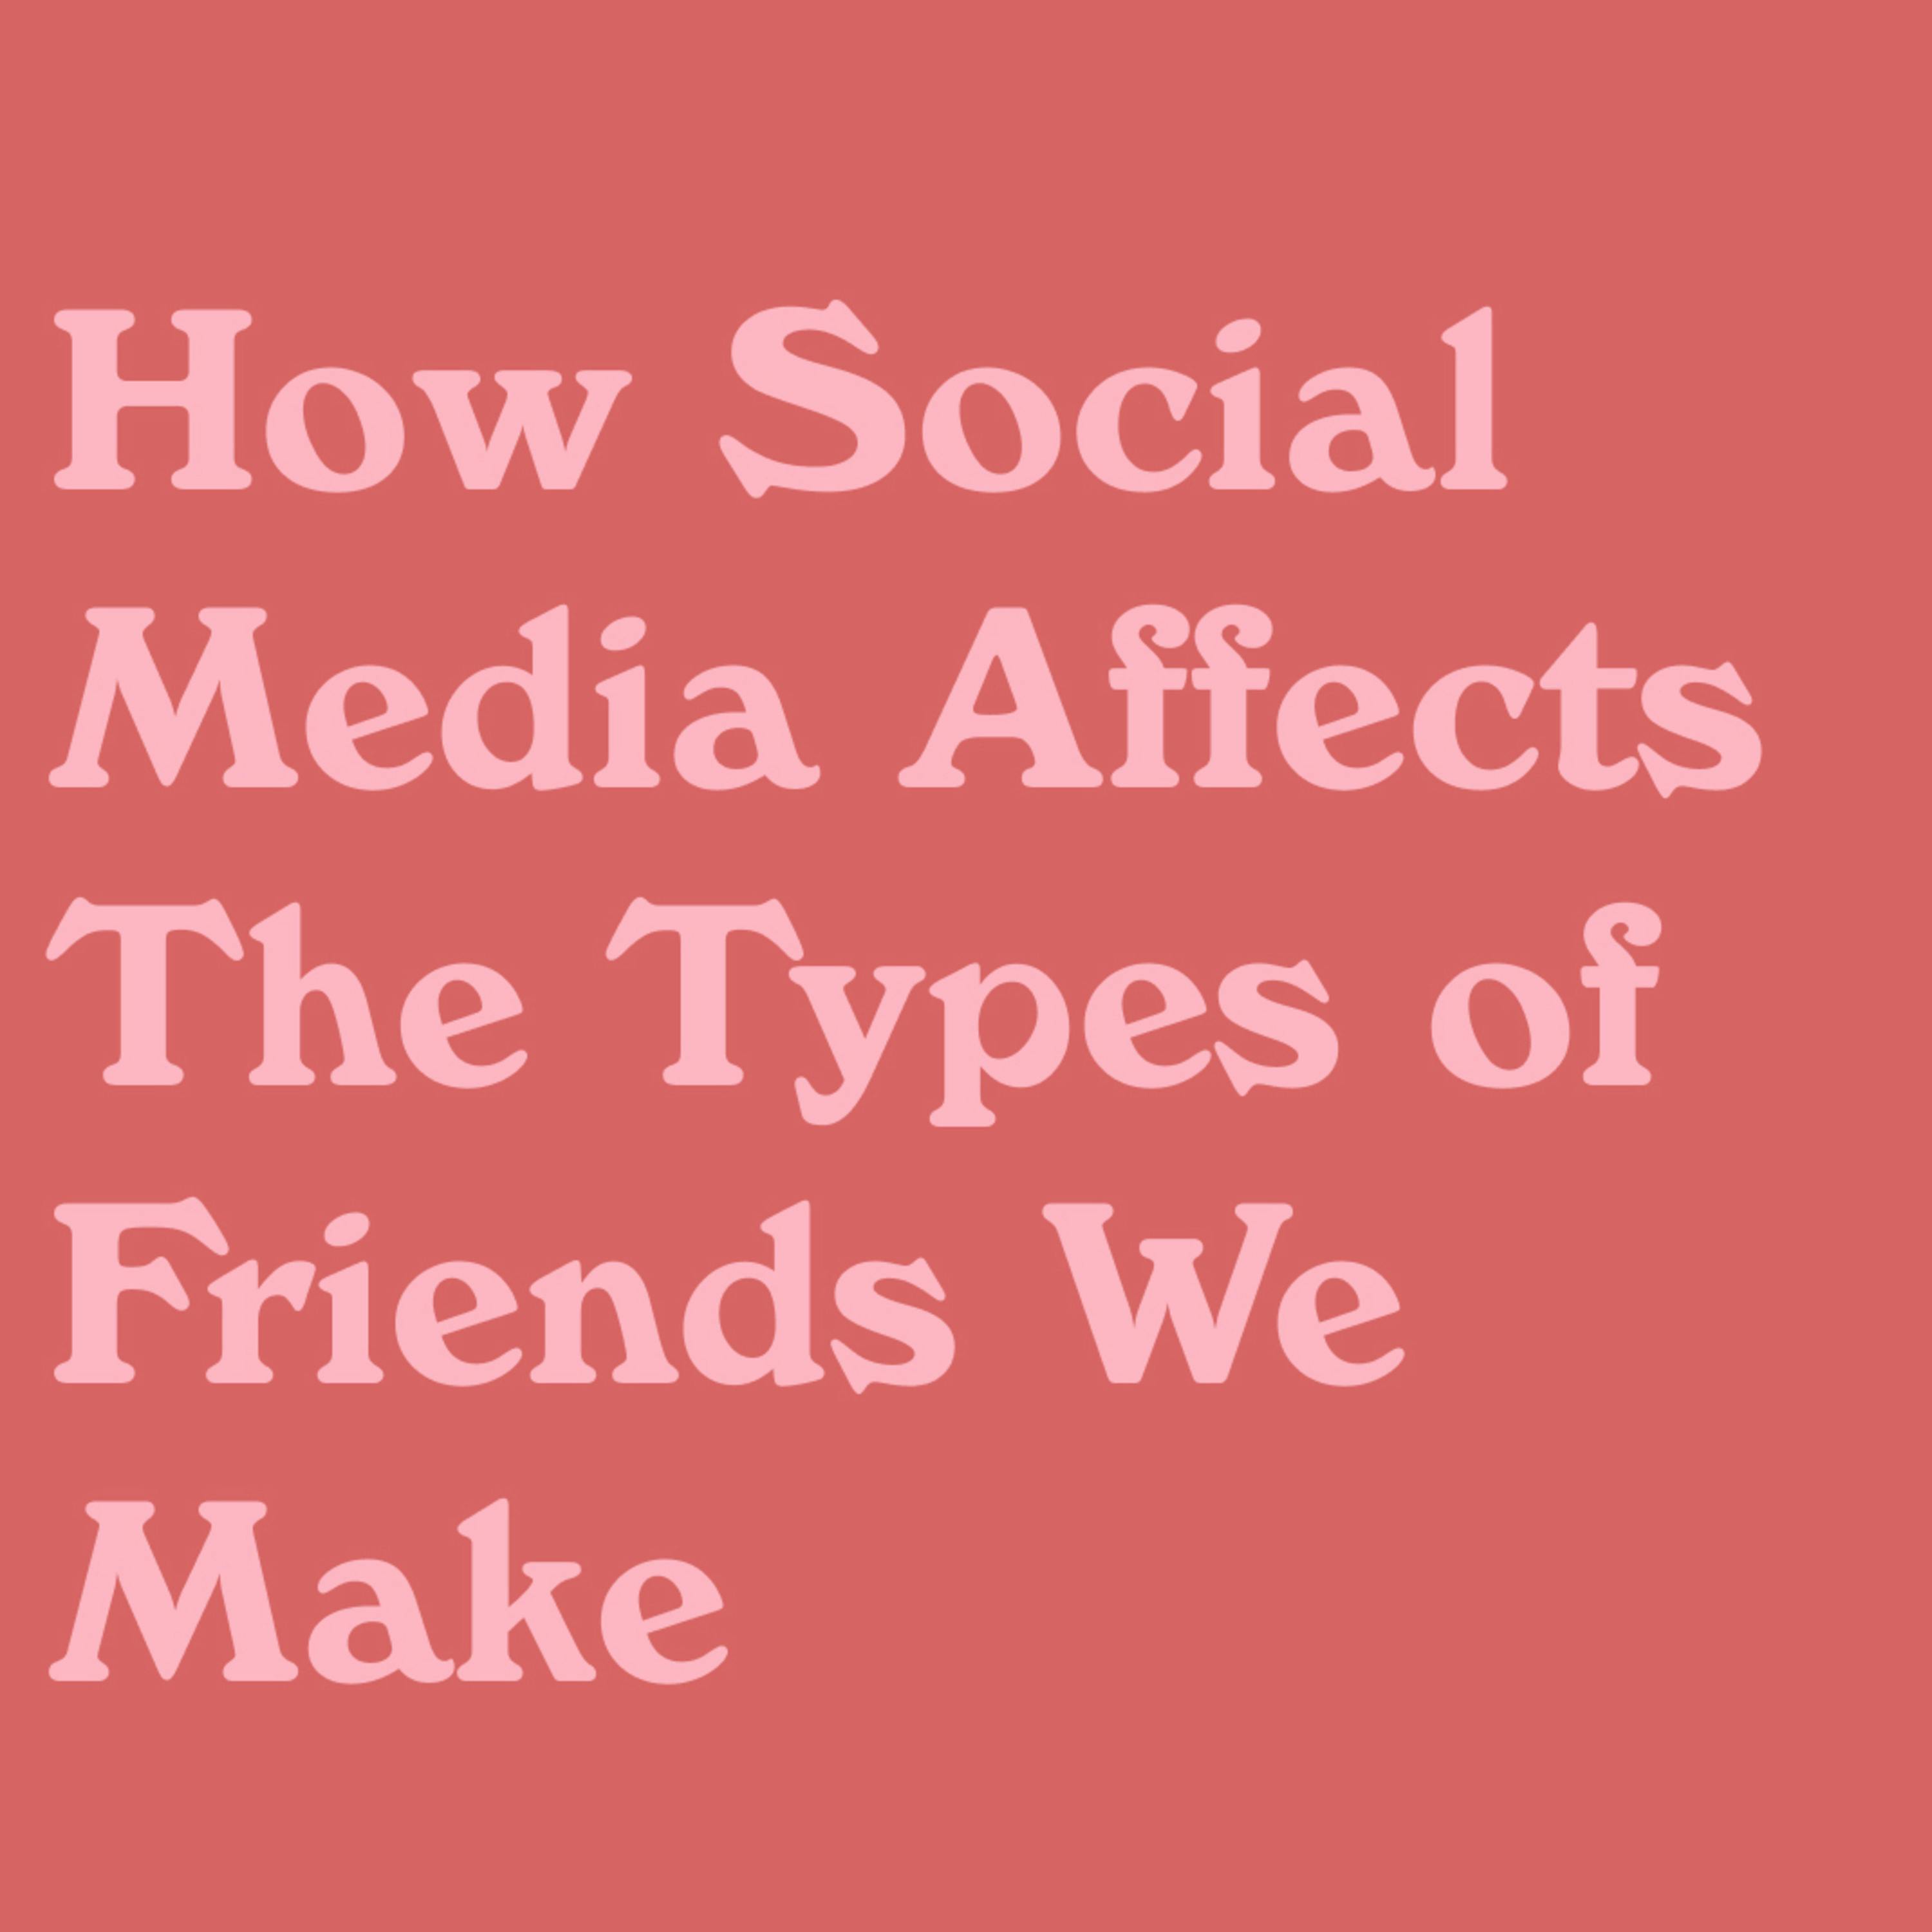 How Social Media Affects The Types Of Friends We Make